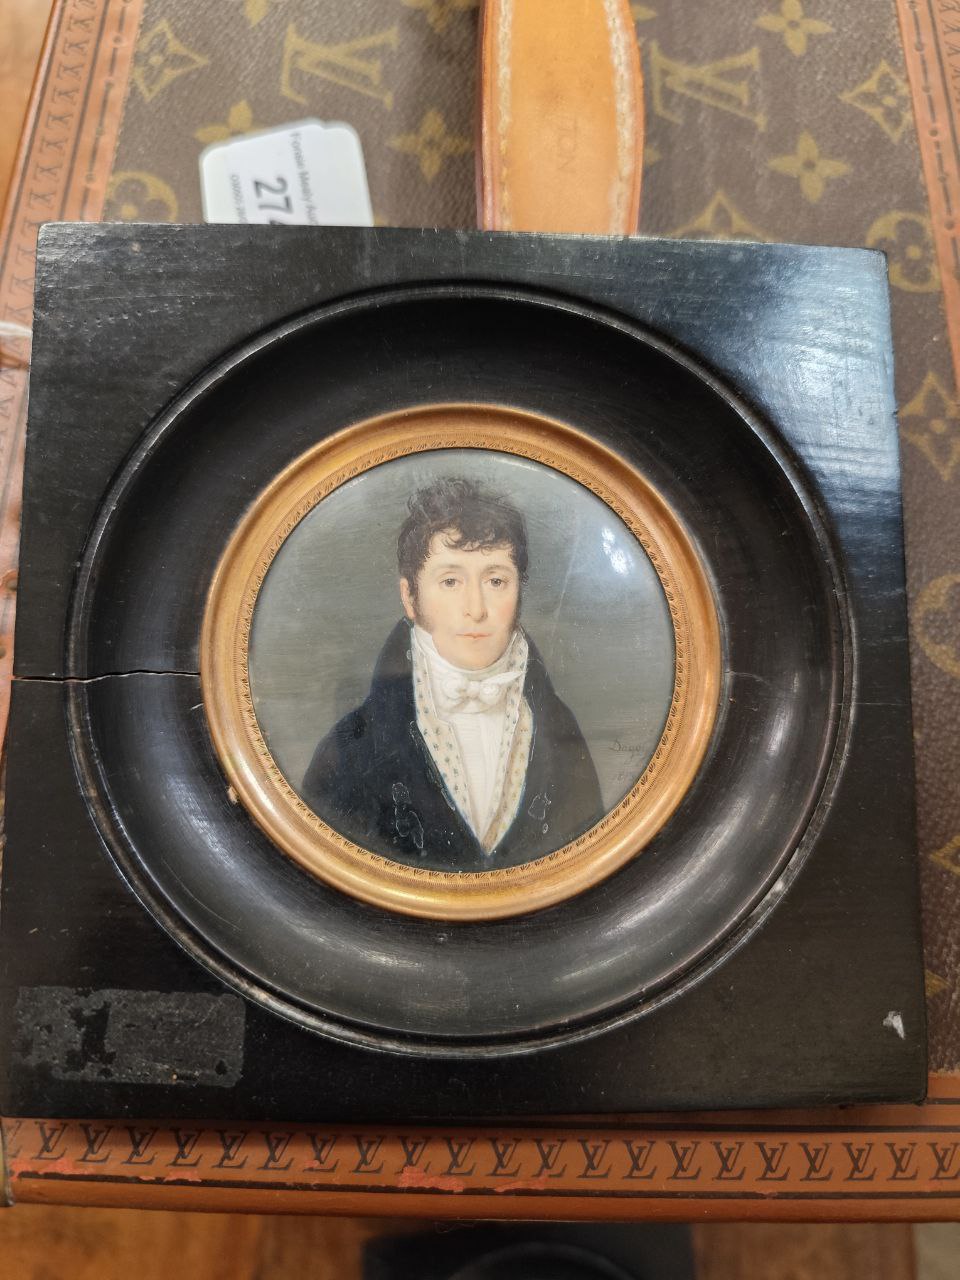 Pierre-Douard Dagoty, French (1775-1871) Miniatures: "Portrait of an Elegant Young Gentleman with - Image 4 of 6